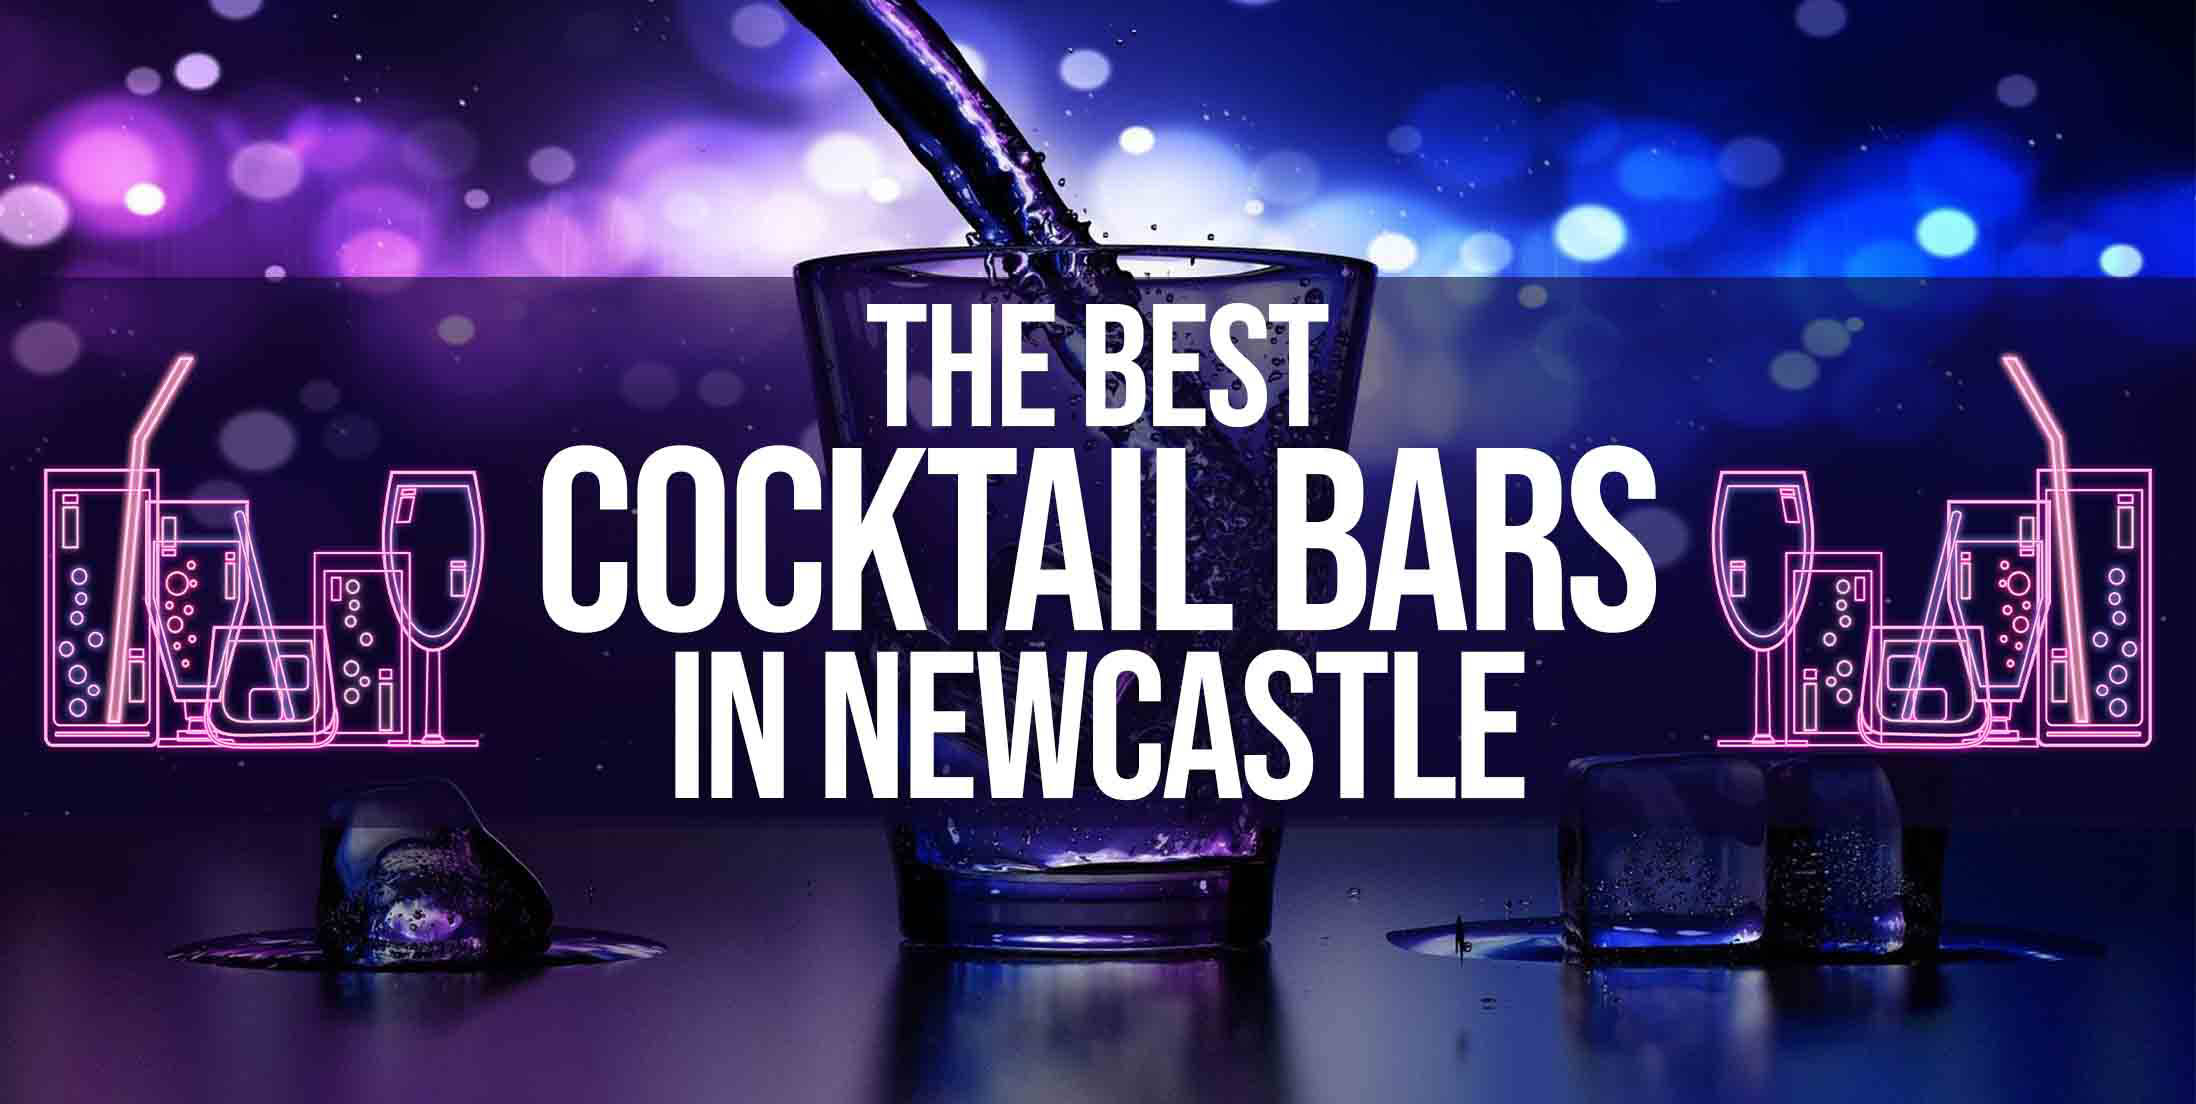 Best Cocktail Bars in Newcastle